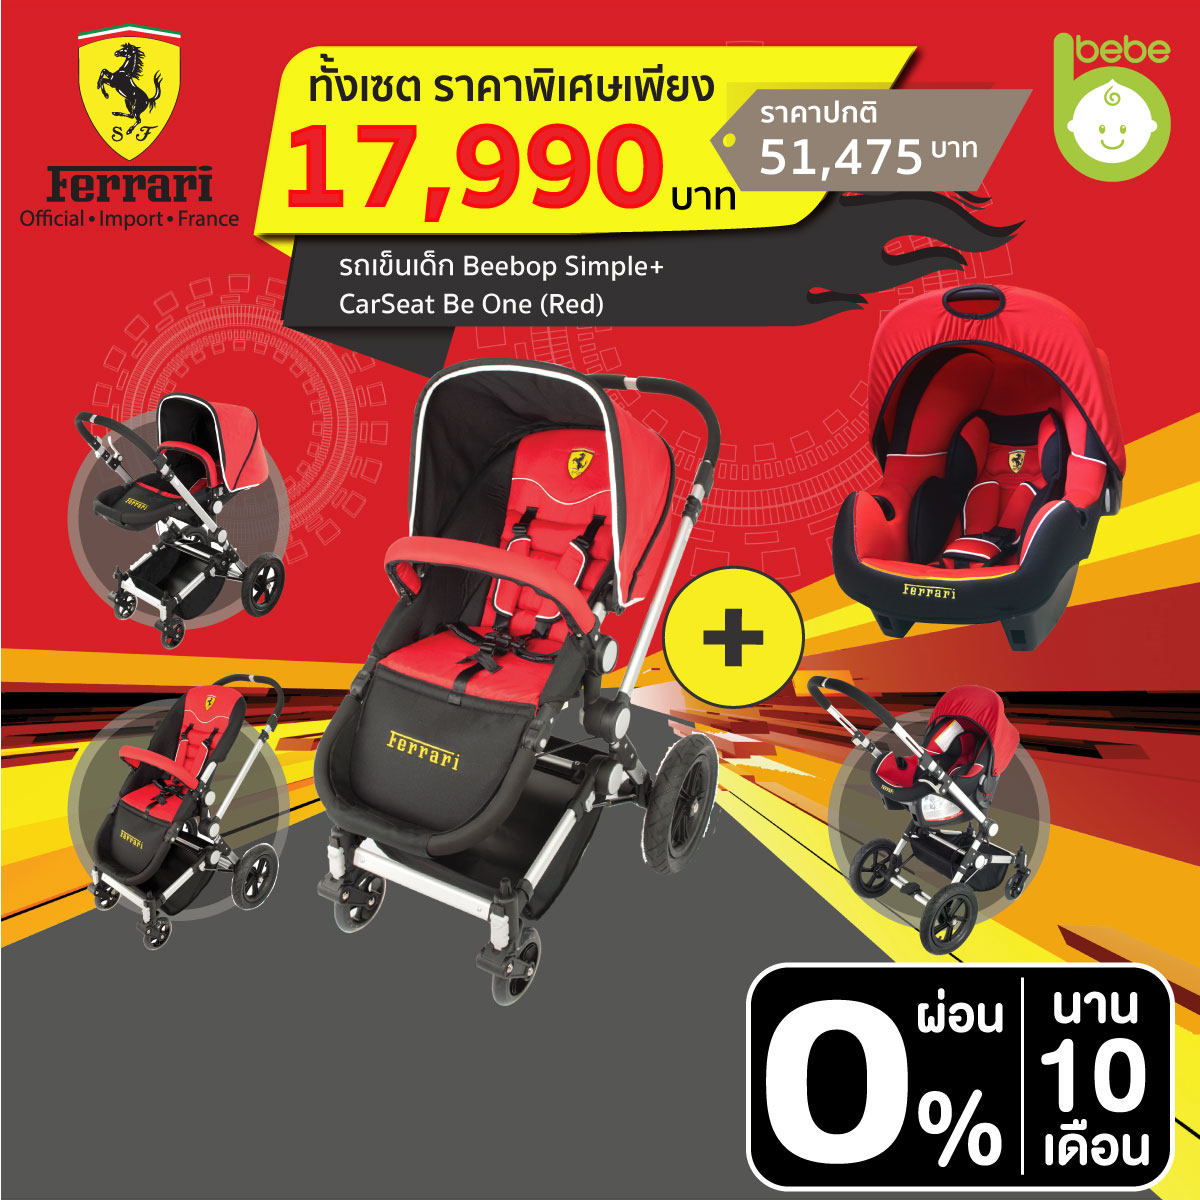  Ferrari : Stroller Beebop Simple+CarSeat Be One (ฺRed)